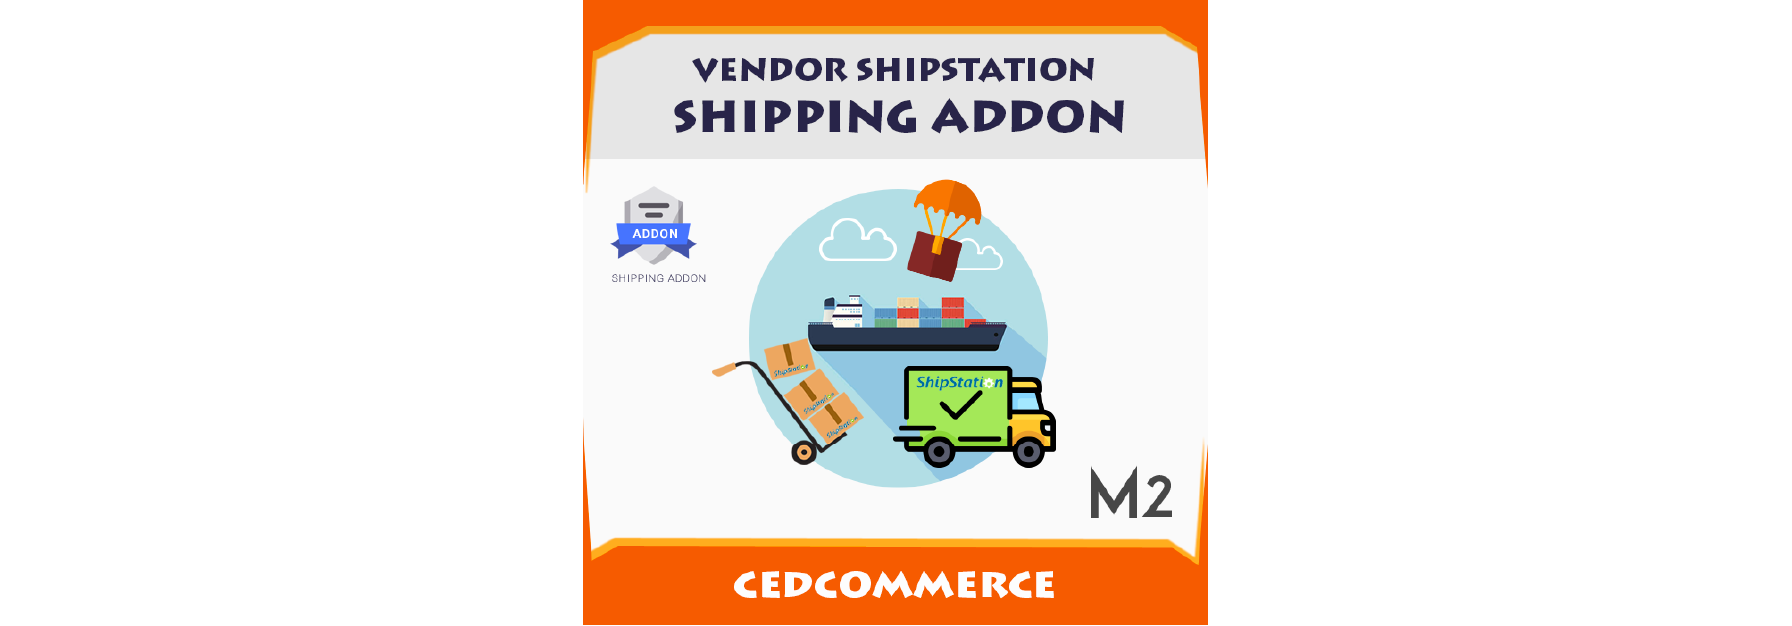 Vendor ShipStation Shipping by CedCommerce for Integrated Shipping Options
